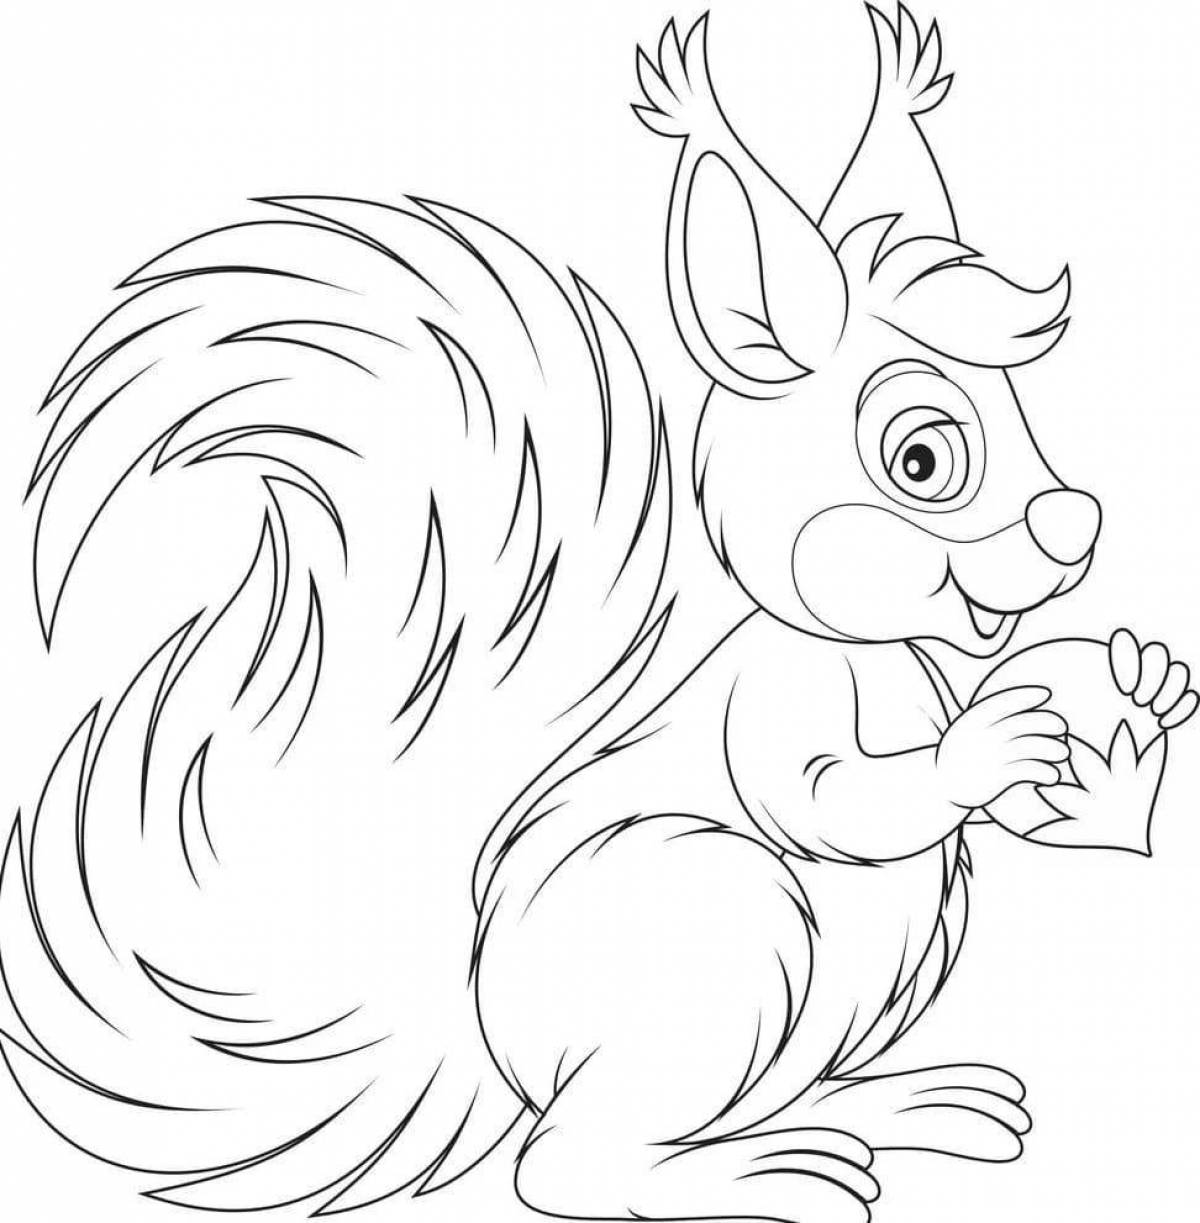 Funny coloring of a squirrel with a bump